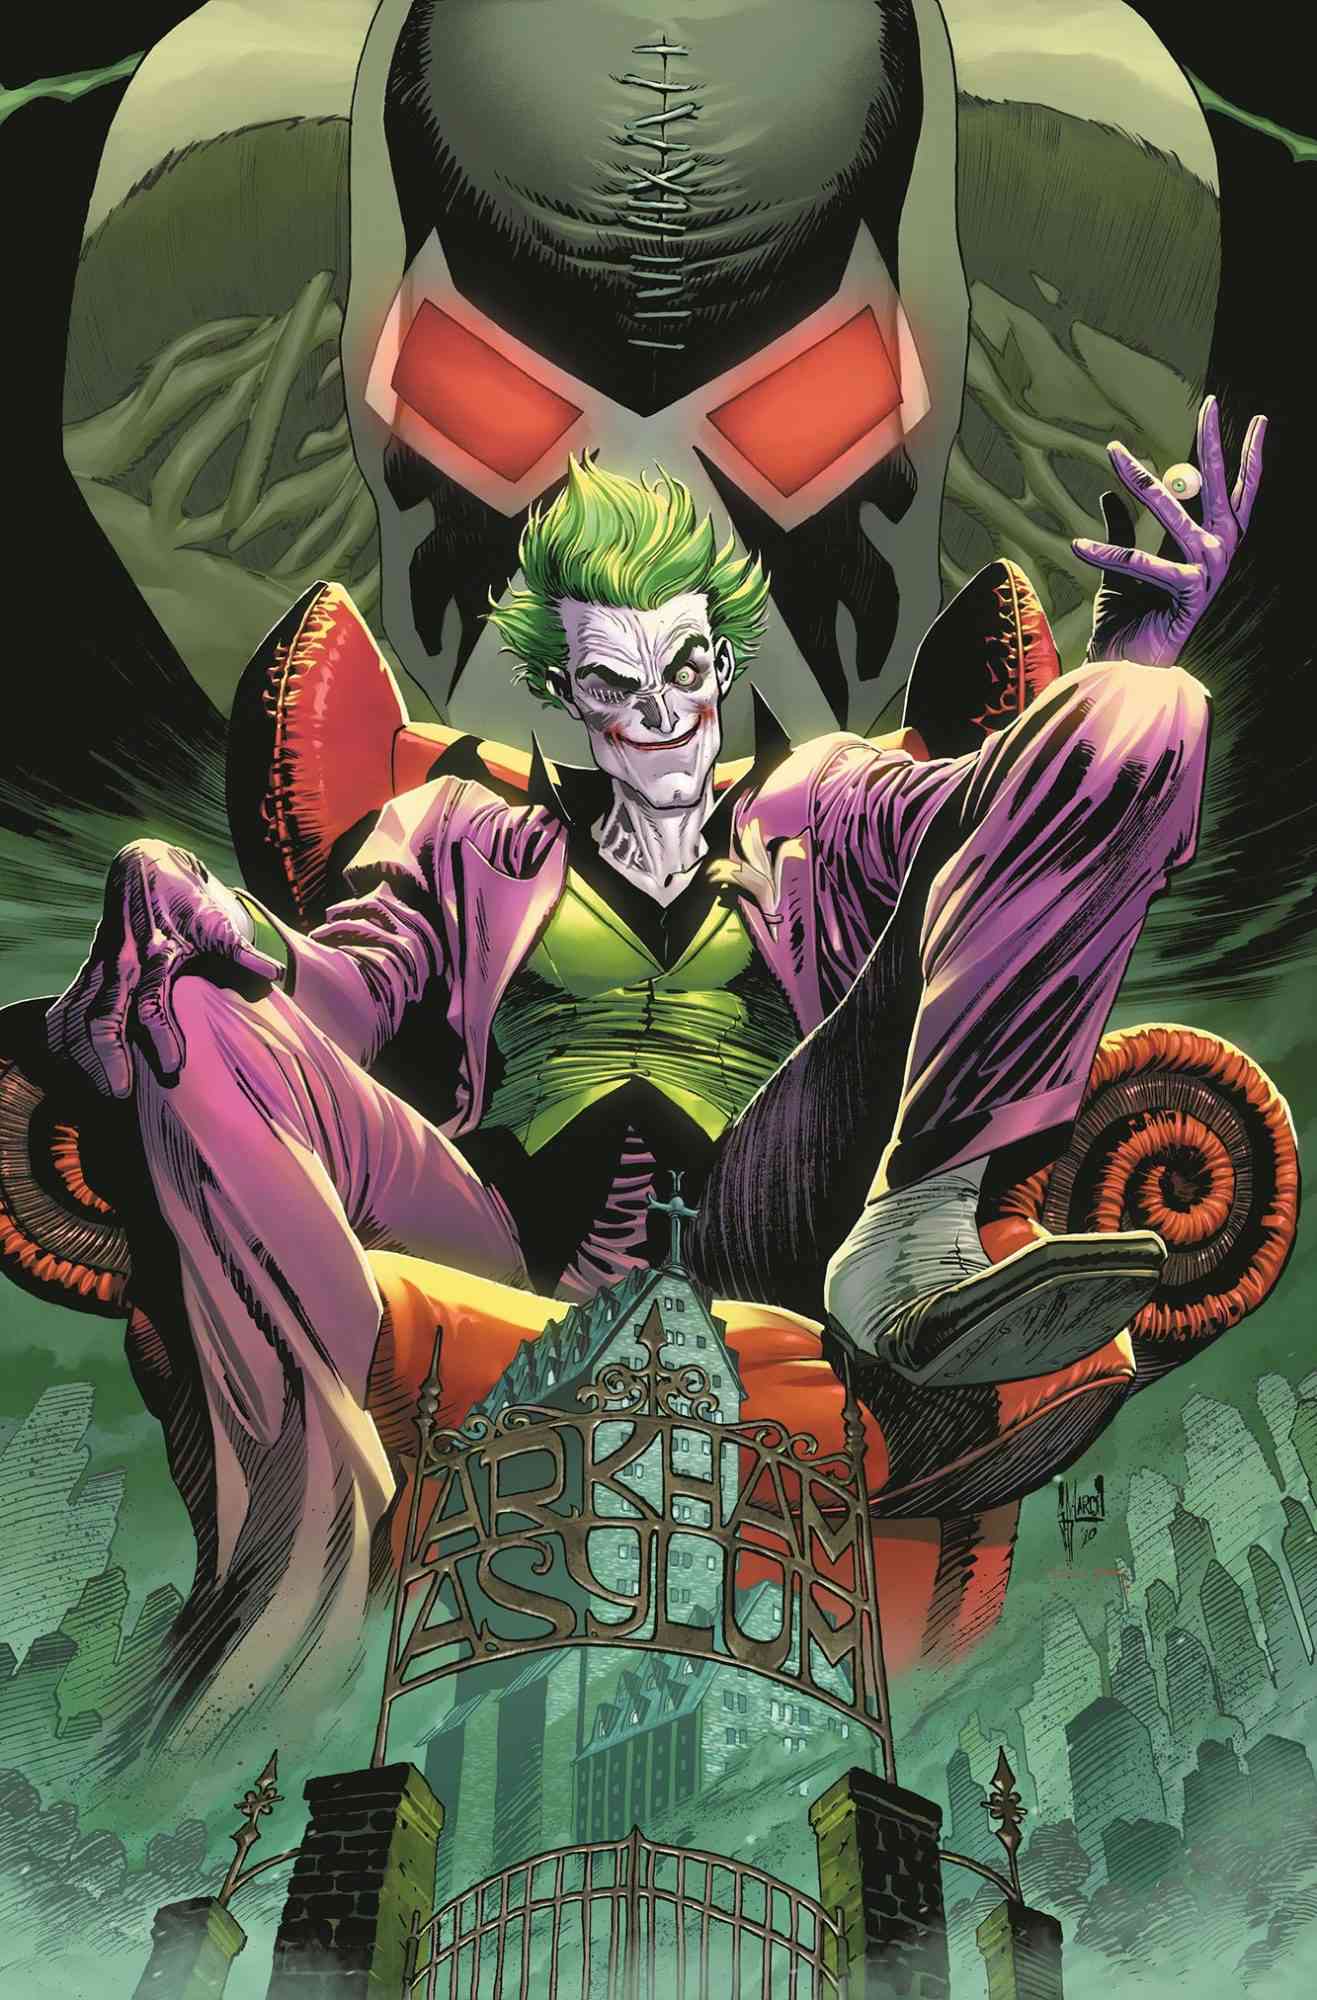 The Joker is getting his own monthly comic from DC.